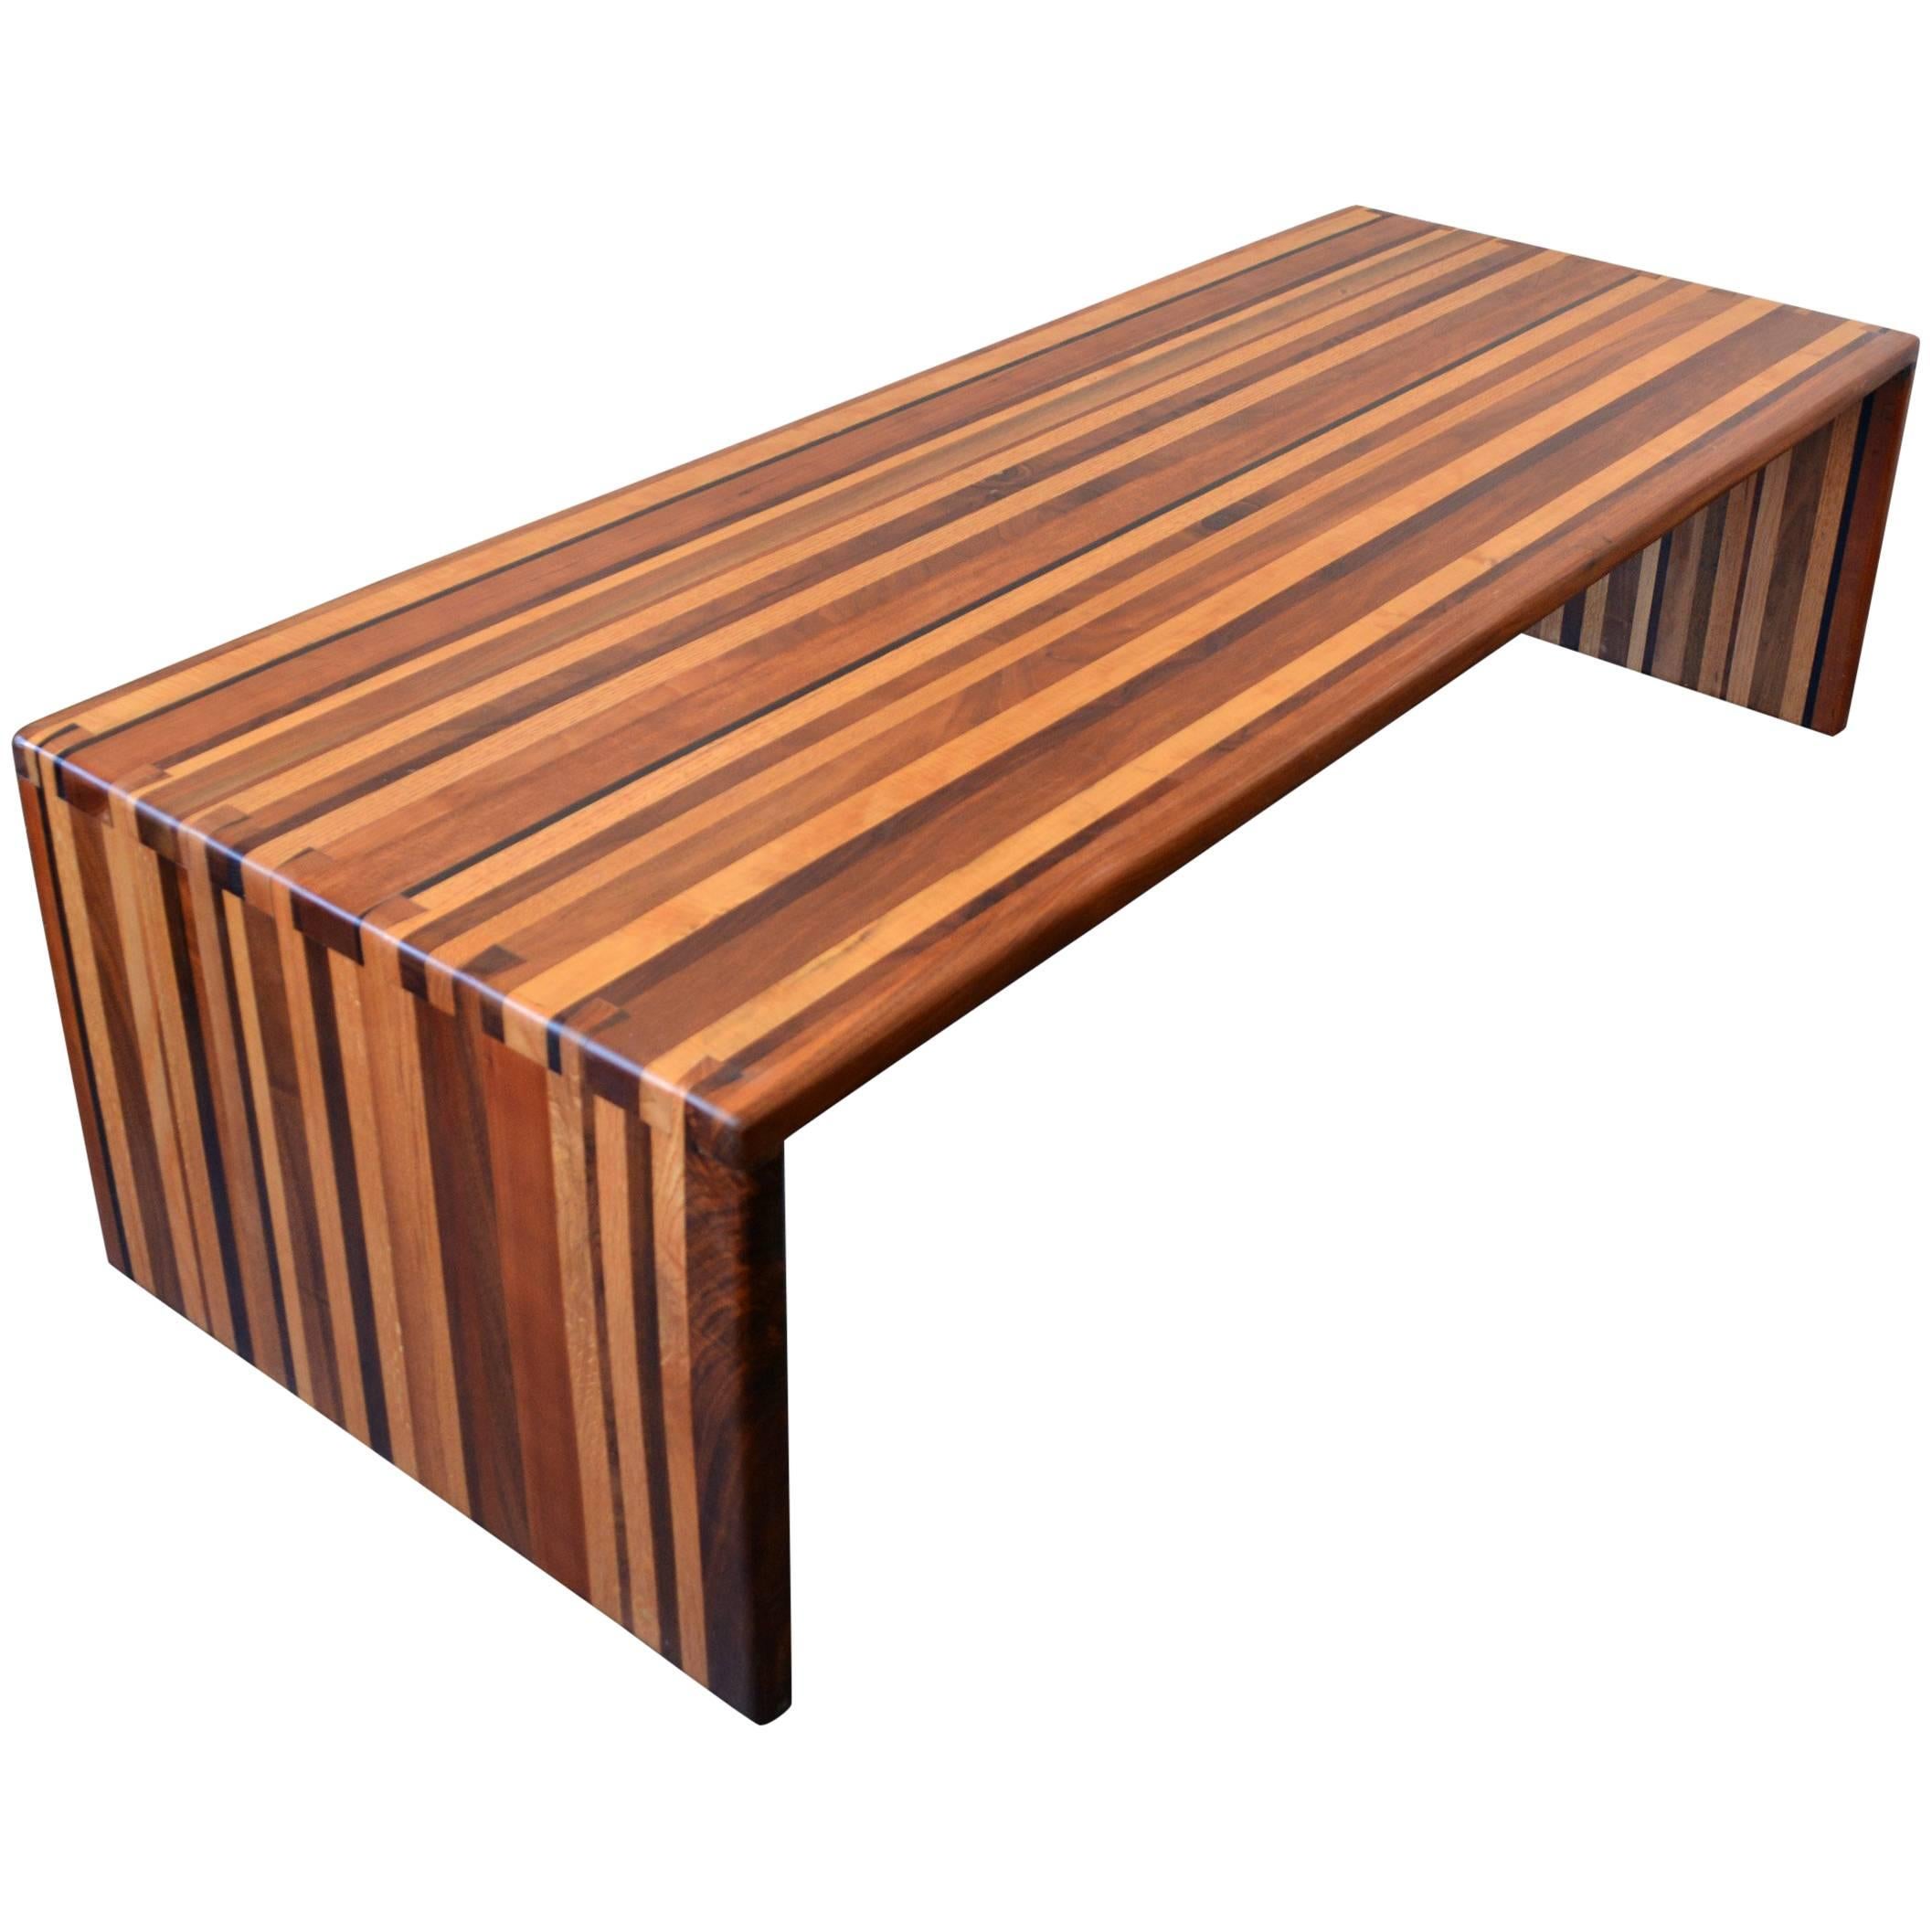 California Craft Studio Laminated Mixed Woods Coffee Table or Bench